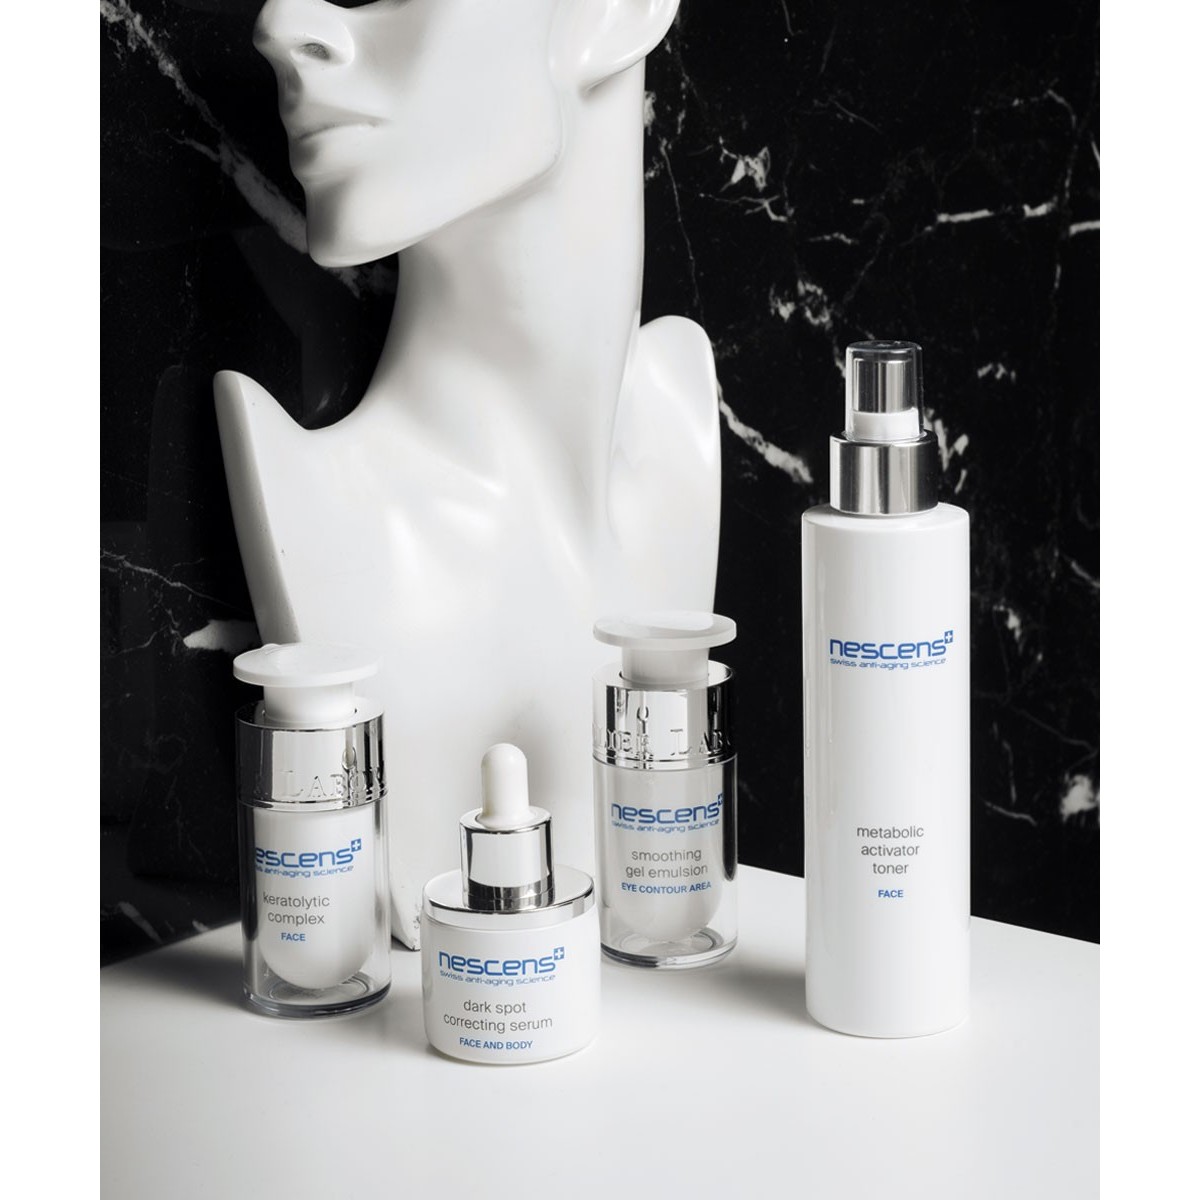 The Radiance and Glow Protocol prevents skin damage caused by pollution, exposure to UV radiation and natural skin aging.